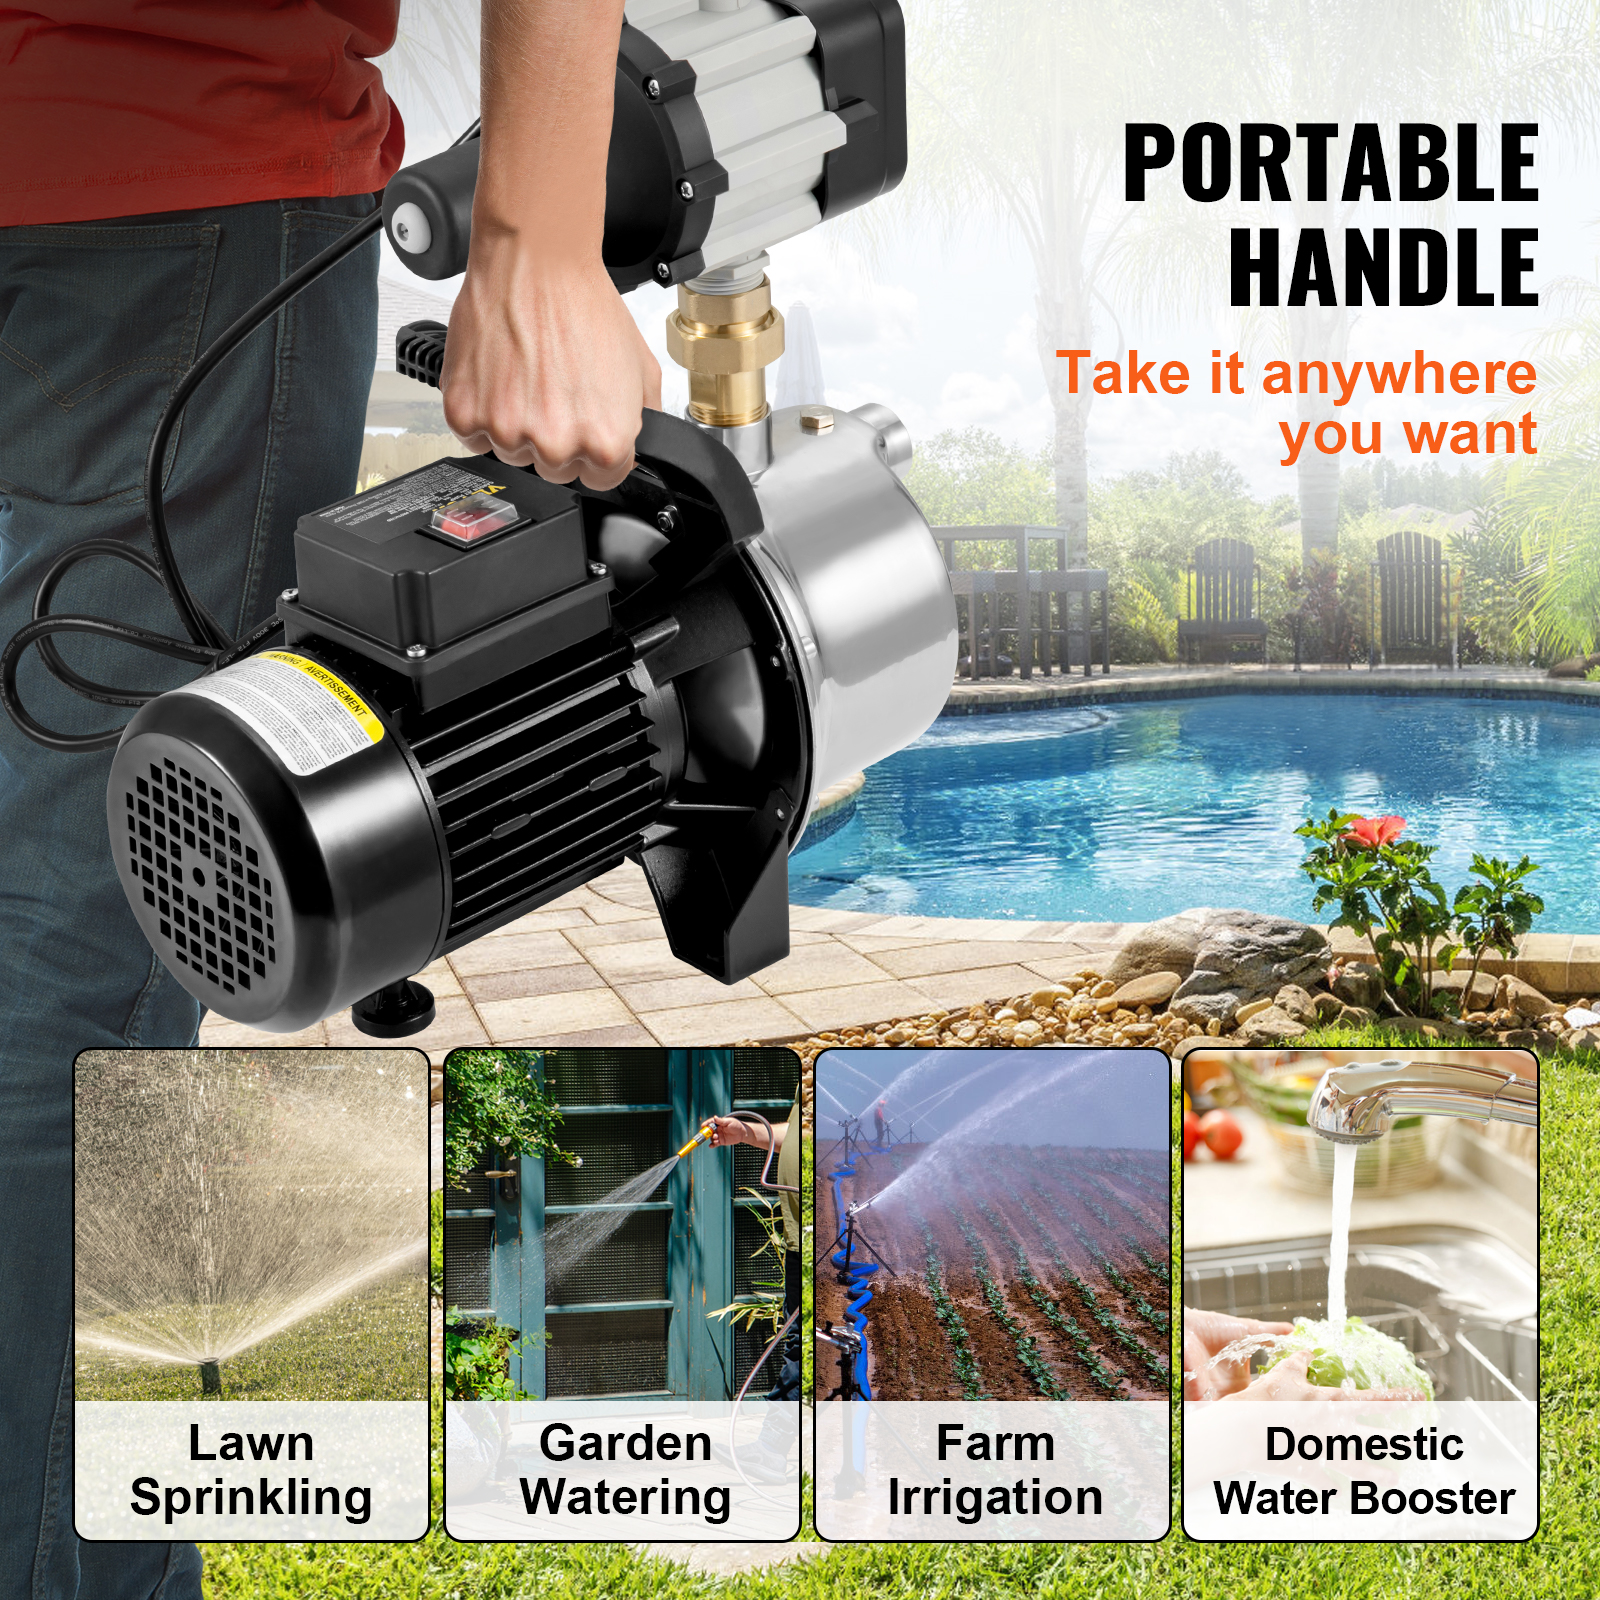 VEVORShallow Well Pump, 1.5 HP 115V, 1200 GPH 164 ft Head, Max 87 psi, Portable Stainless Steel Sprinkler Booster Jet Pumps with Automatic Controller for Garden Lawn Irrigation system, Water Transfer - image 5 of 9